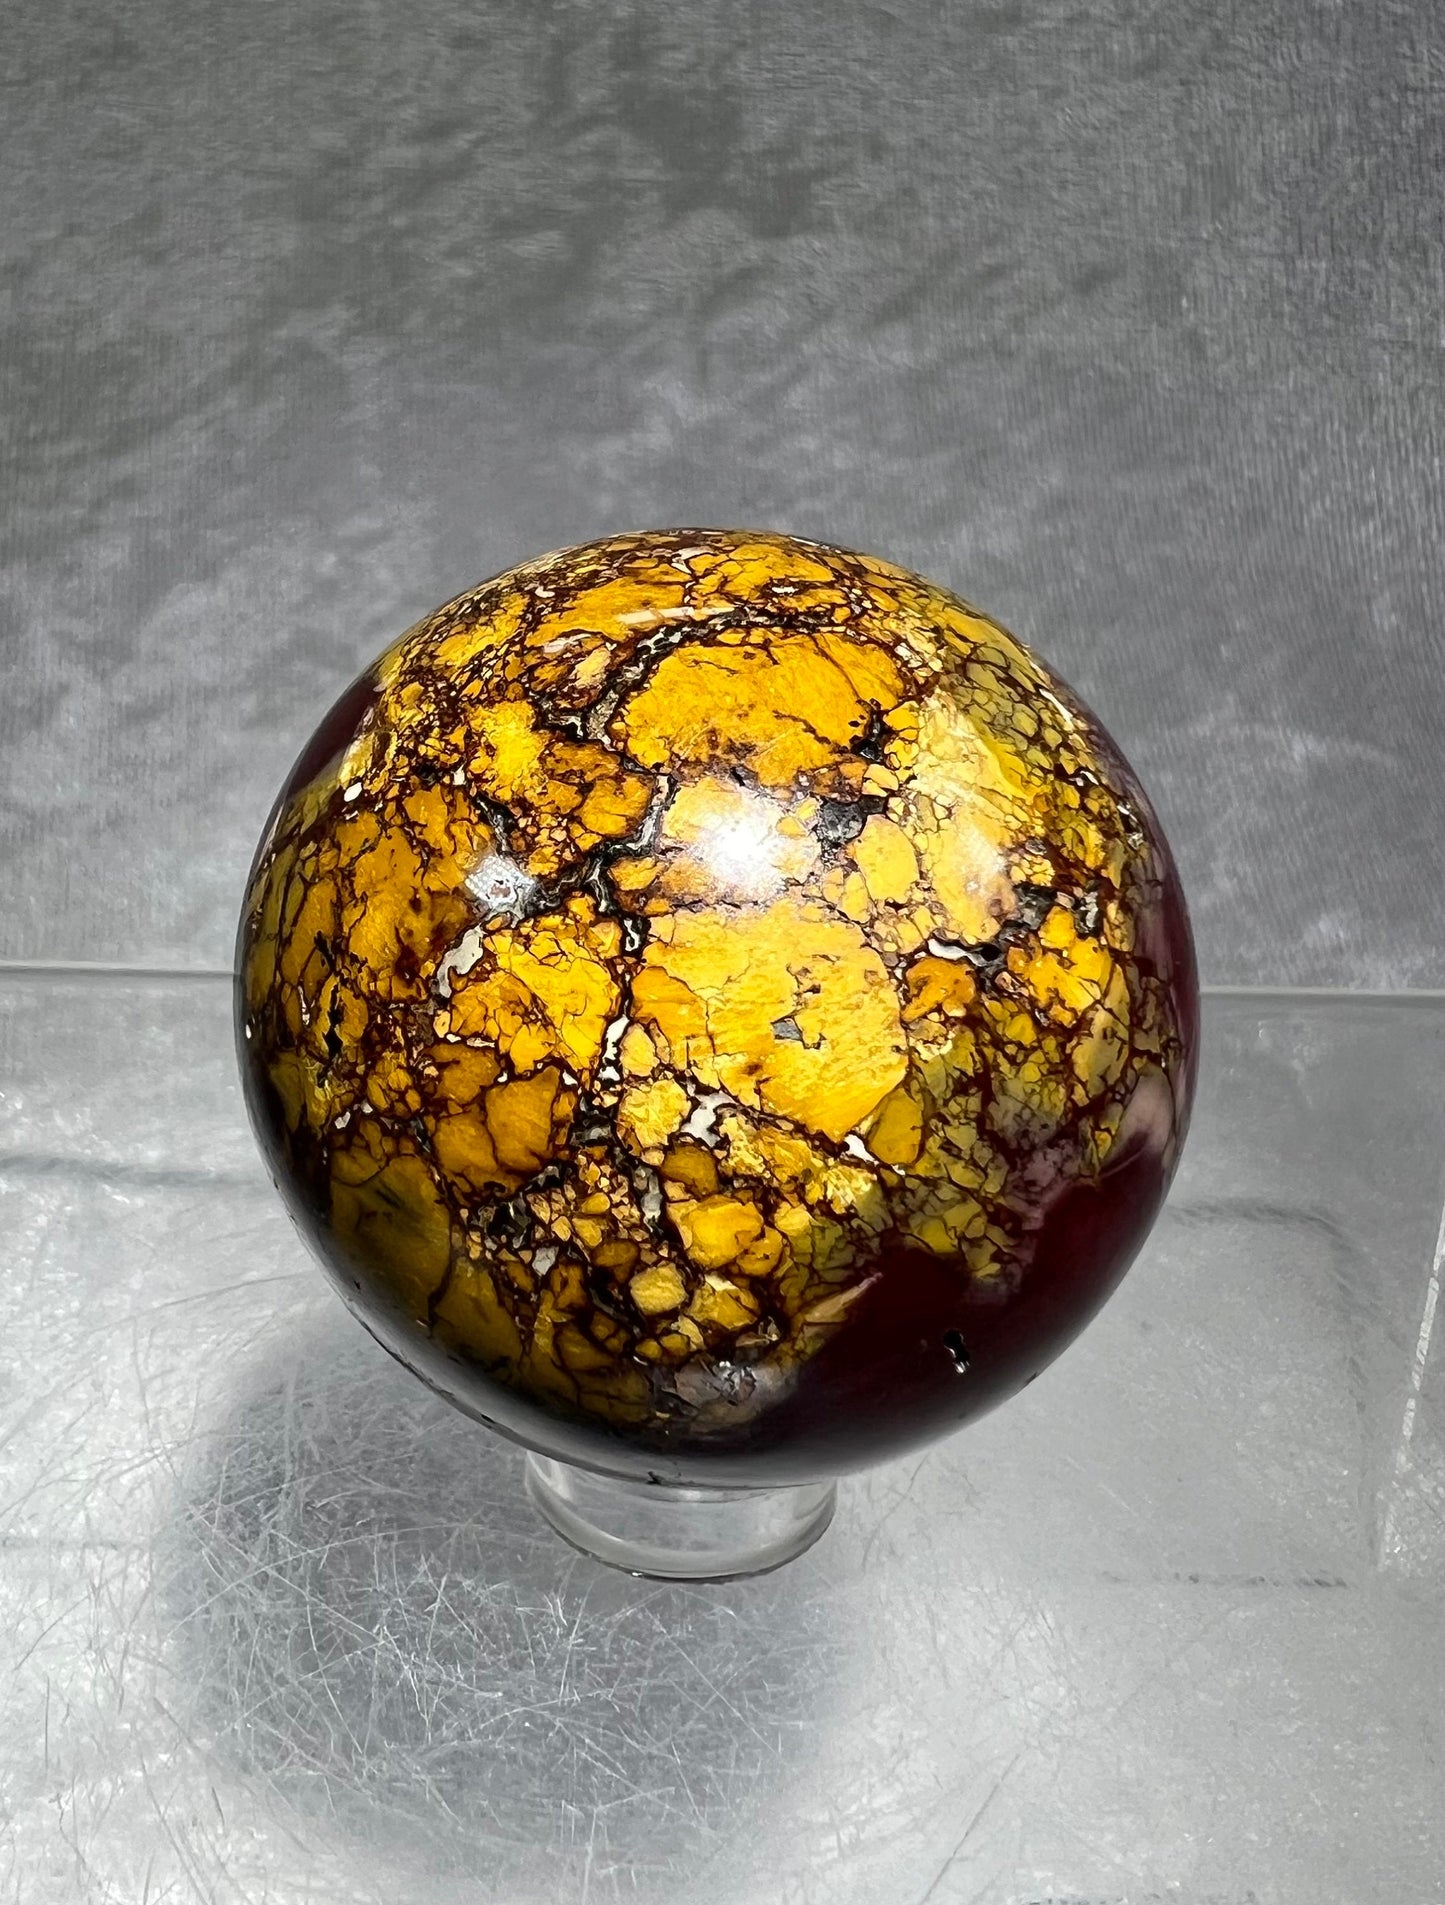 Amazing Red And Yellow Mookaite Sphere. High Quality Crystal. Crazy Mosiac Patterns And Colors!